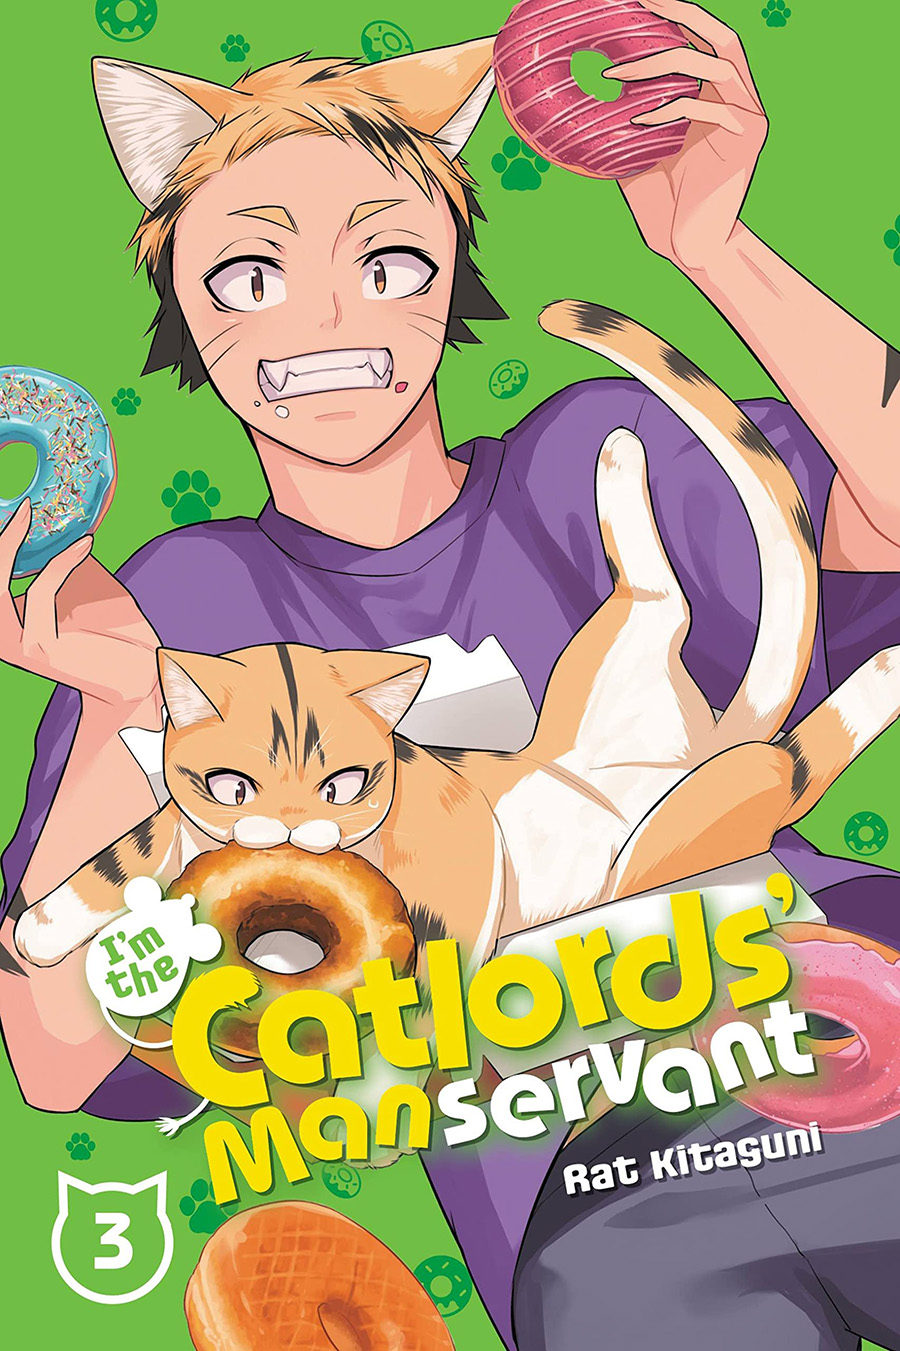 Im The Catlords Manservant Vol 3 GN